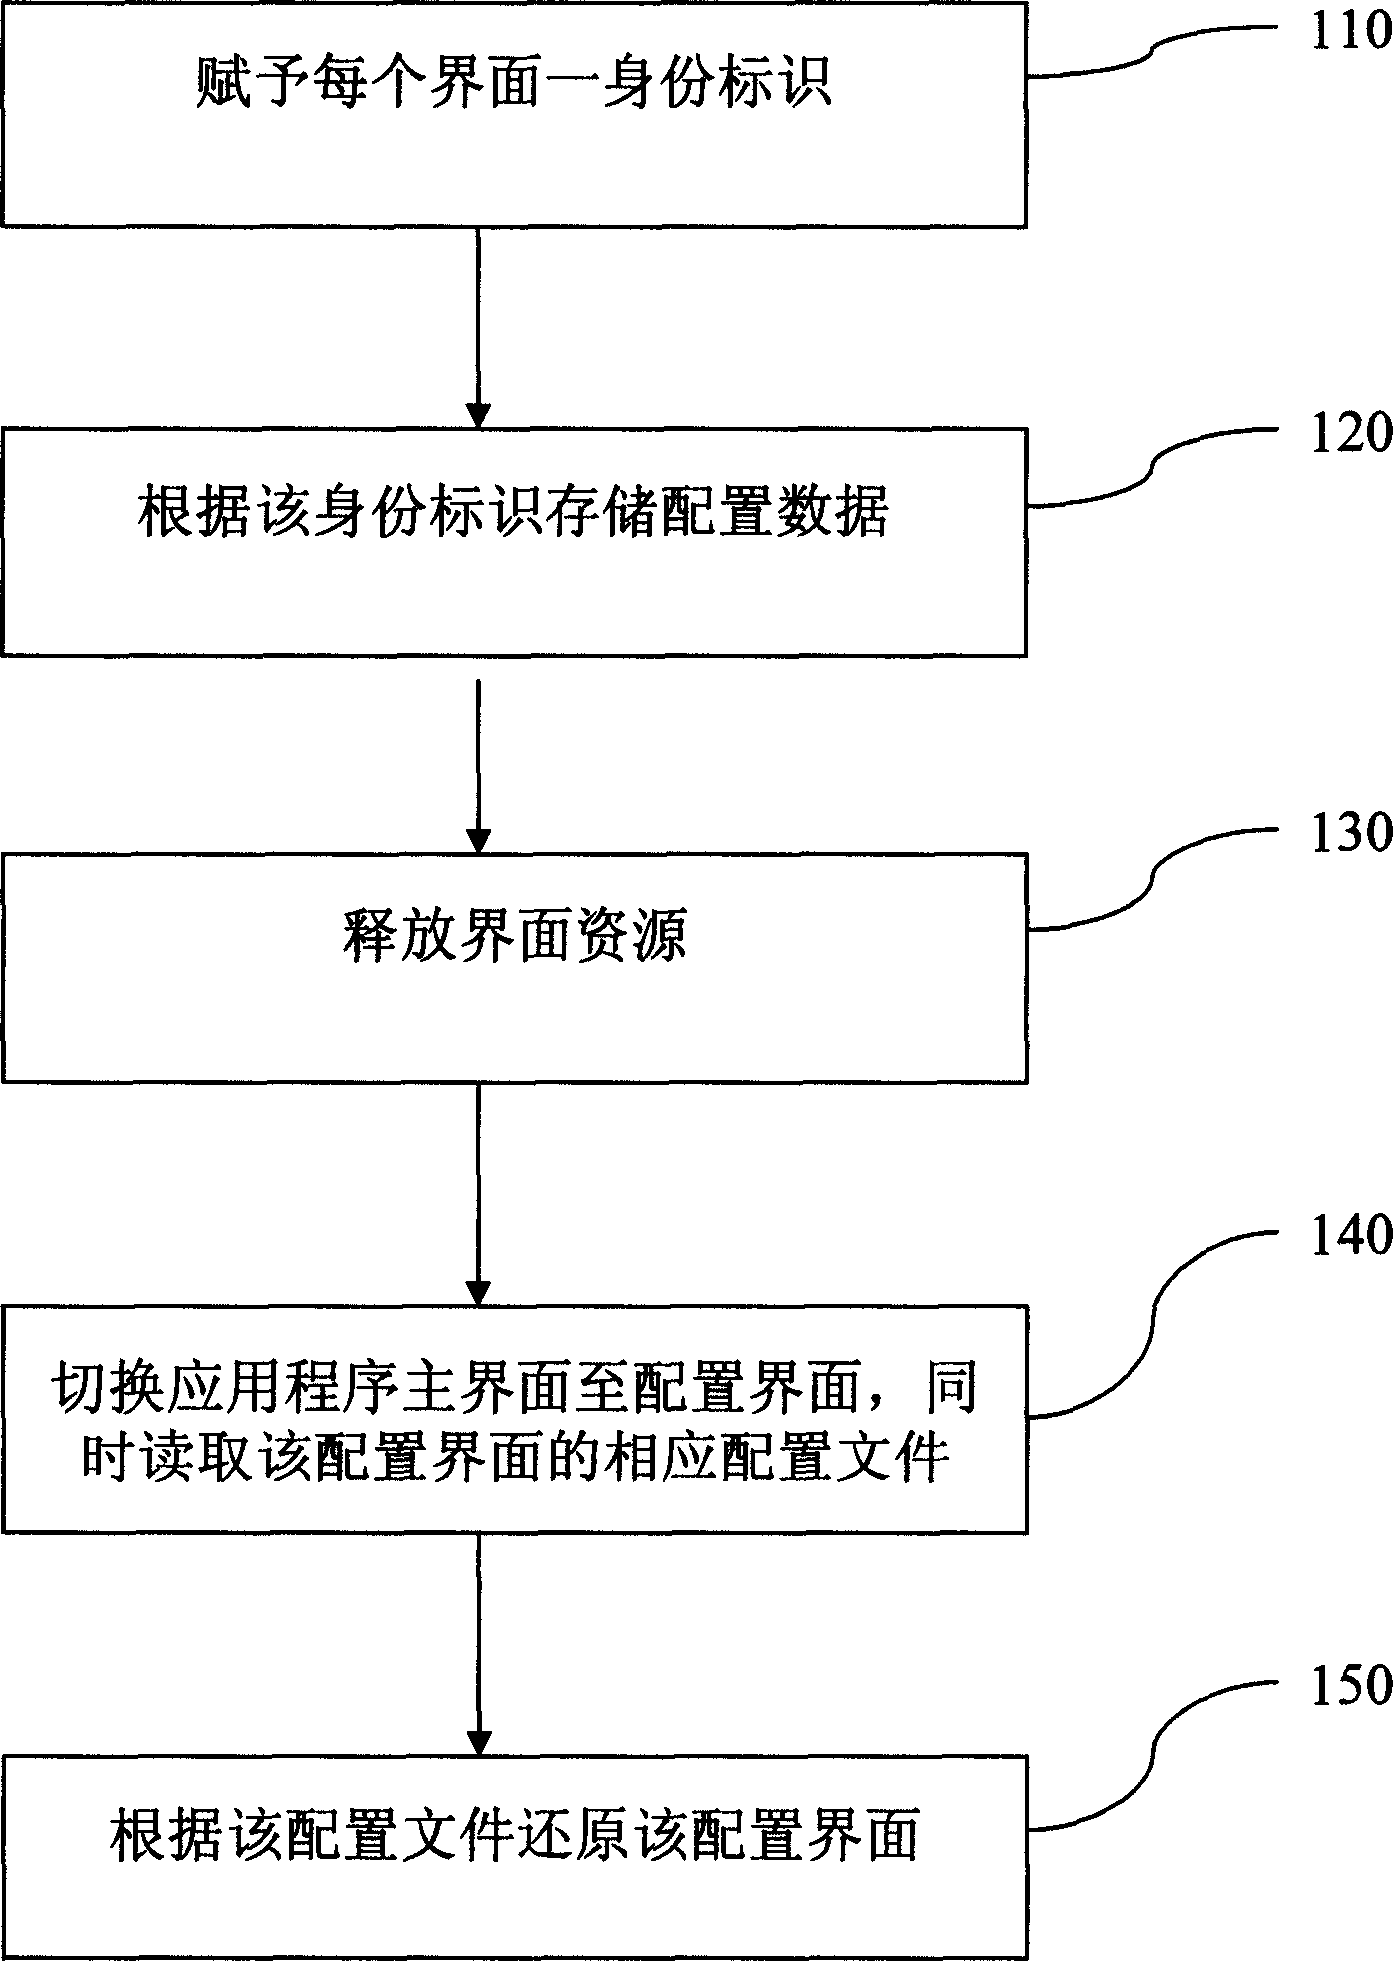 Method for dynamic query of application program configuration information